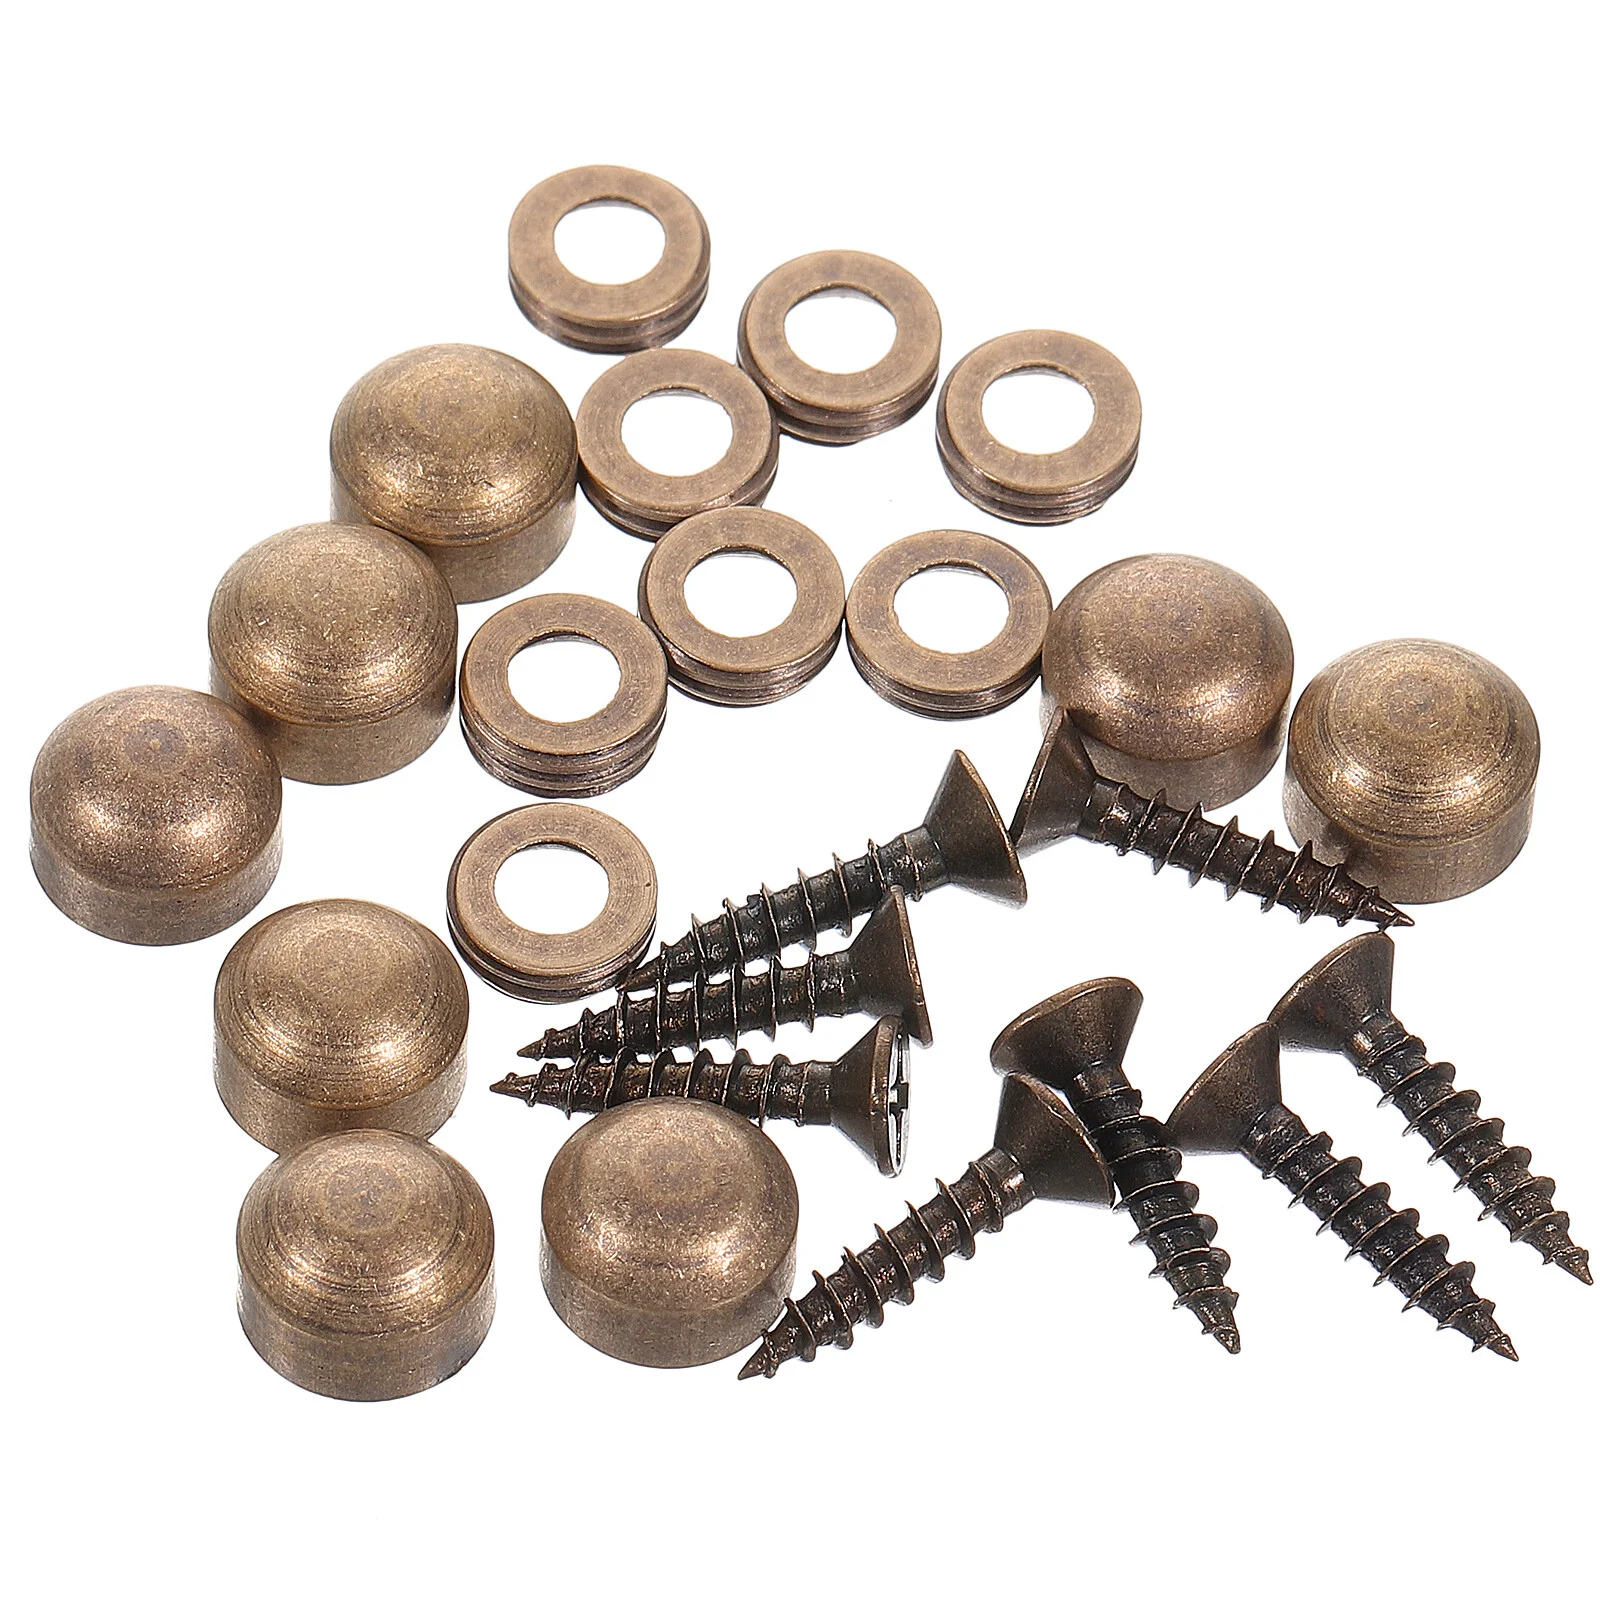 

Cap Nail Decorative Screws Caps Mirror Fixing Cover Fasteners Sign Hanging Hardware Self-Tapping